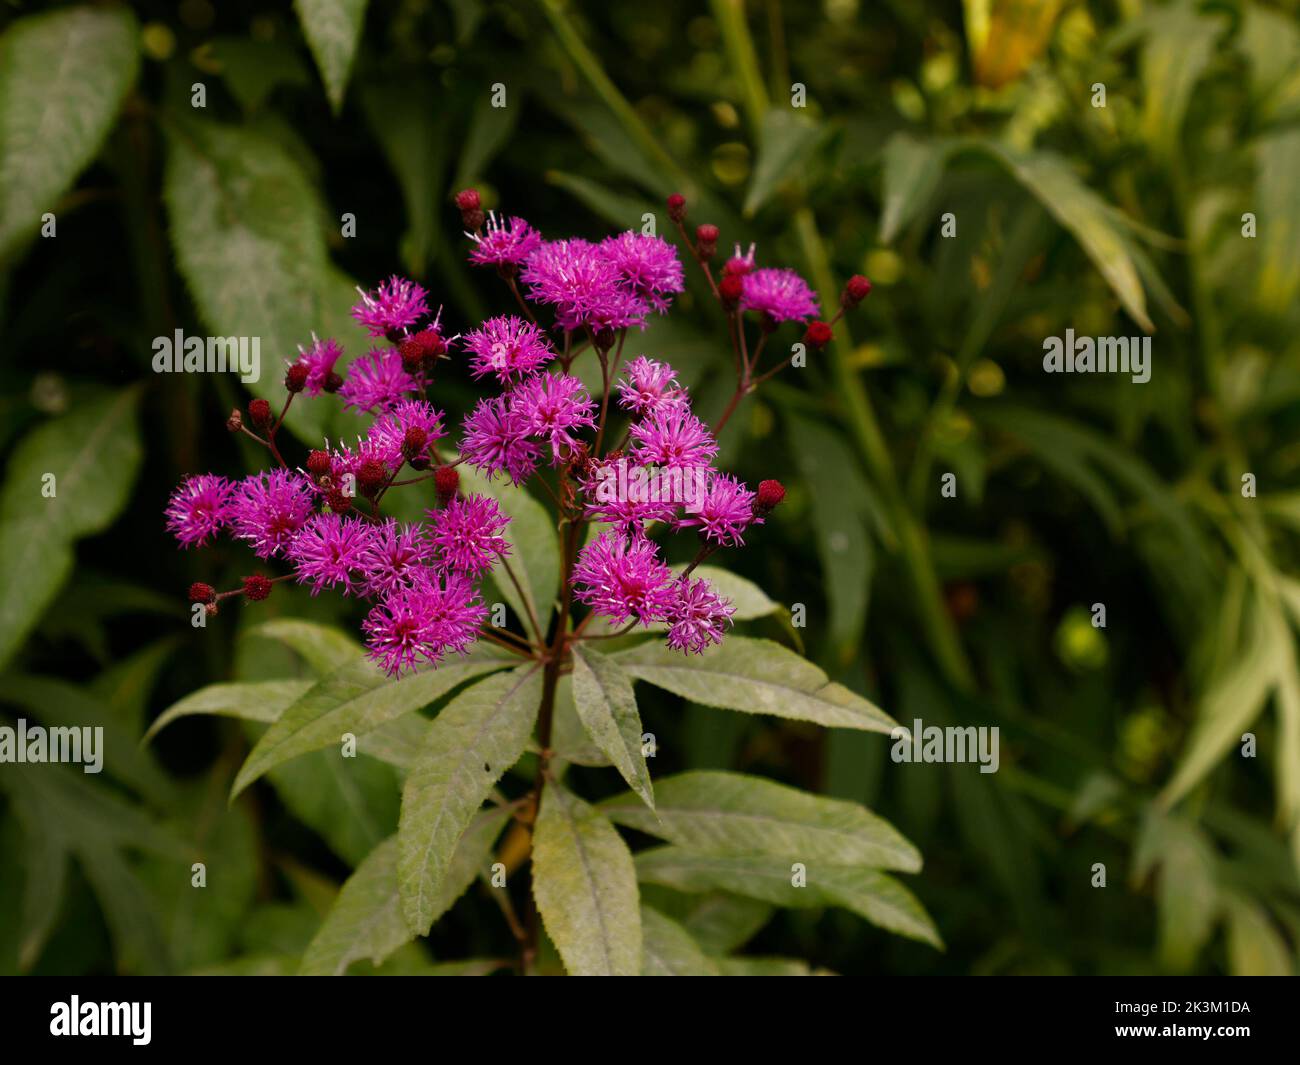 Close up of the 2m tall growing herbaceous perennial flowering garden plant pink-purple flowers of Vernonia arkansana or Arkansas ironweed. Stock Photo